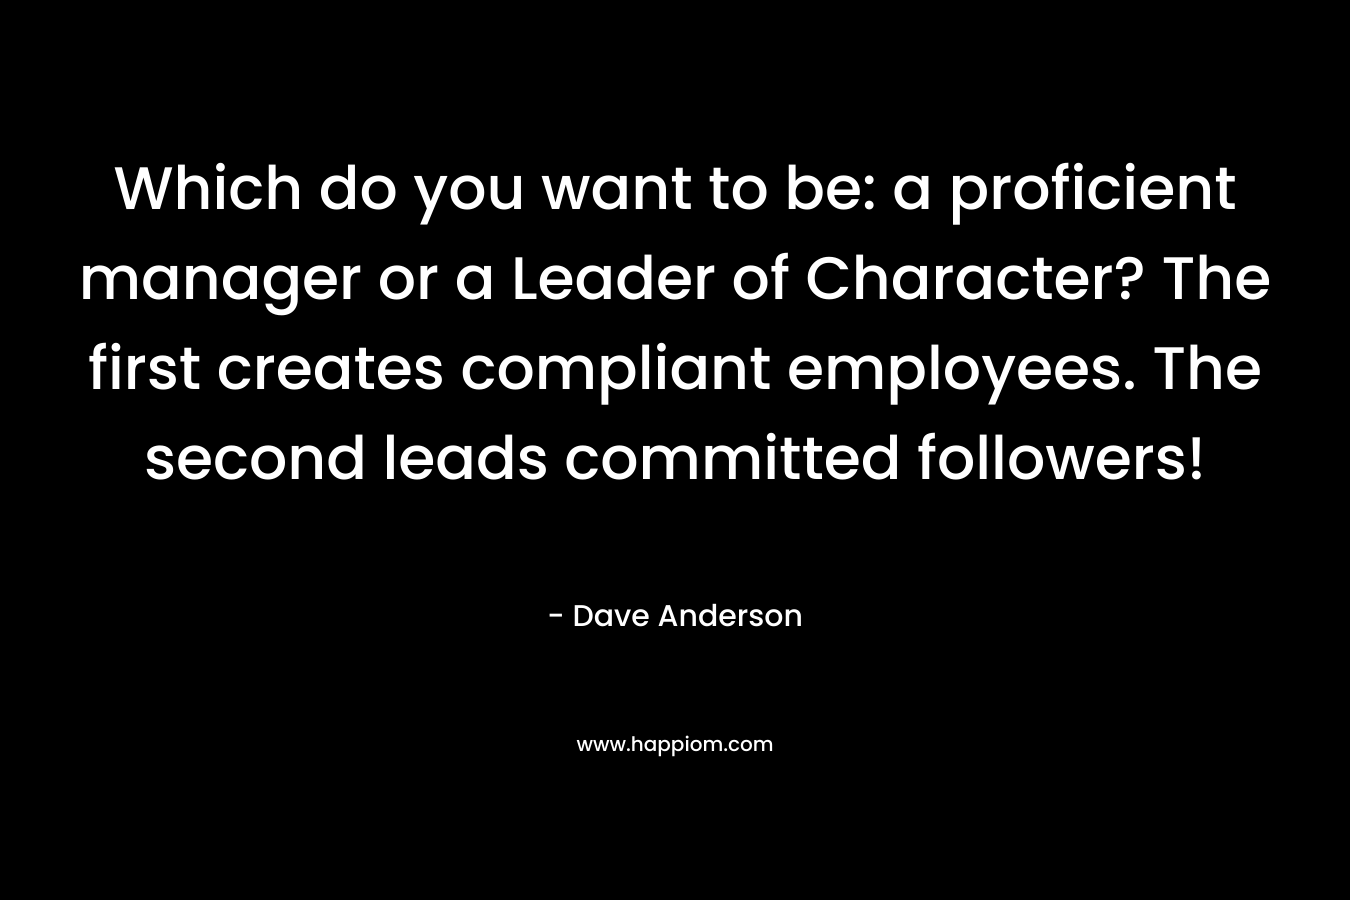 Which do you want to be: a proficient manager or a Leader of Character? The first creates compliant employees. The second leads committed followers! – Dave Anderson